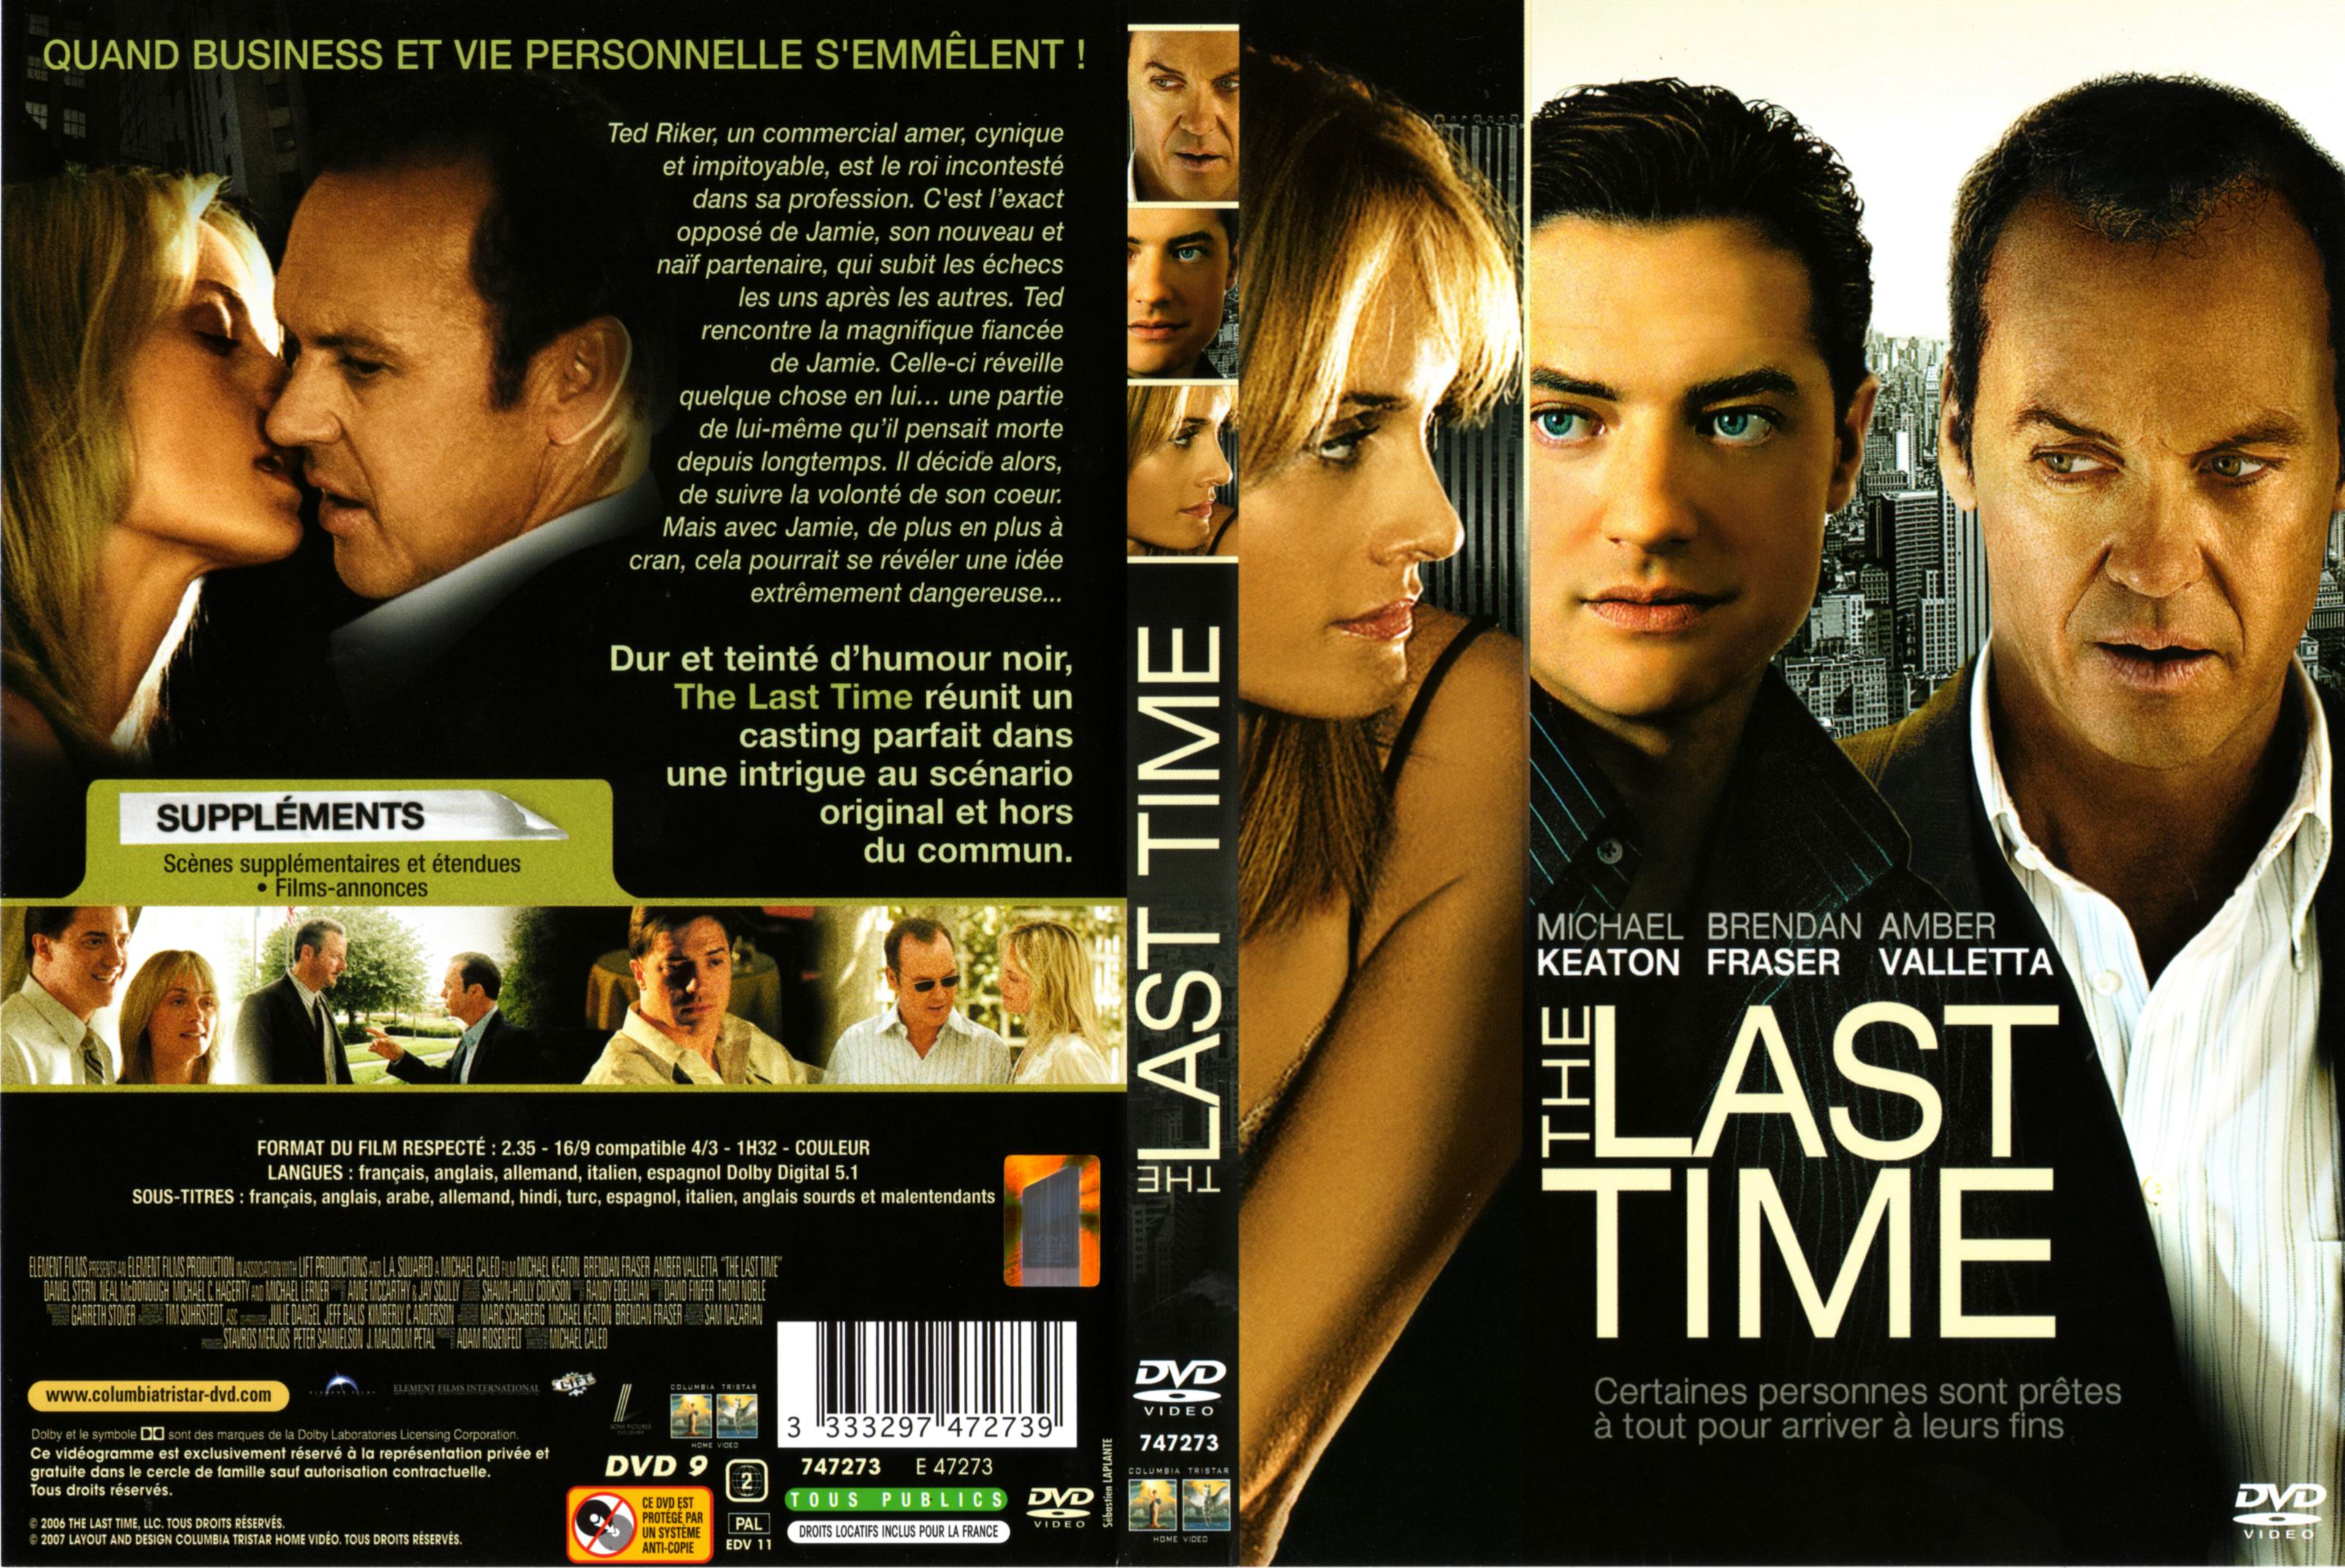 Jaquette DVD The last time